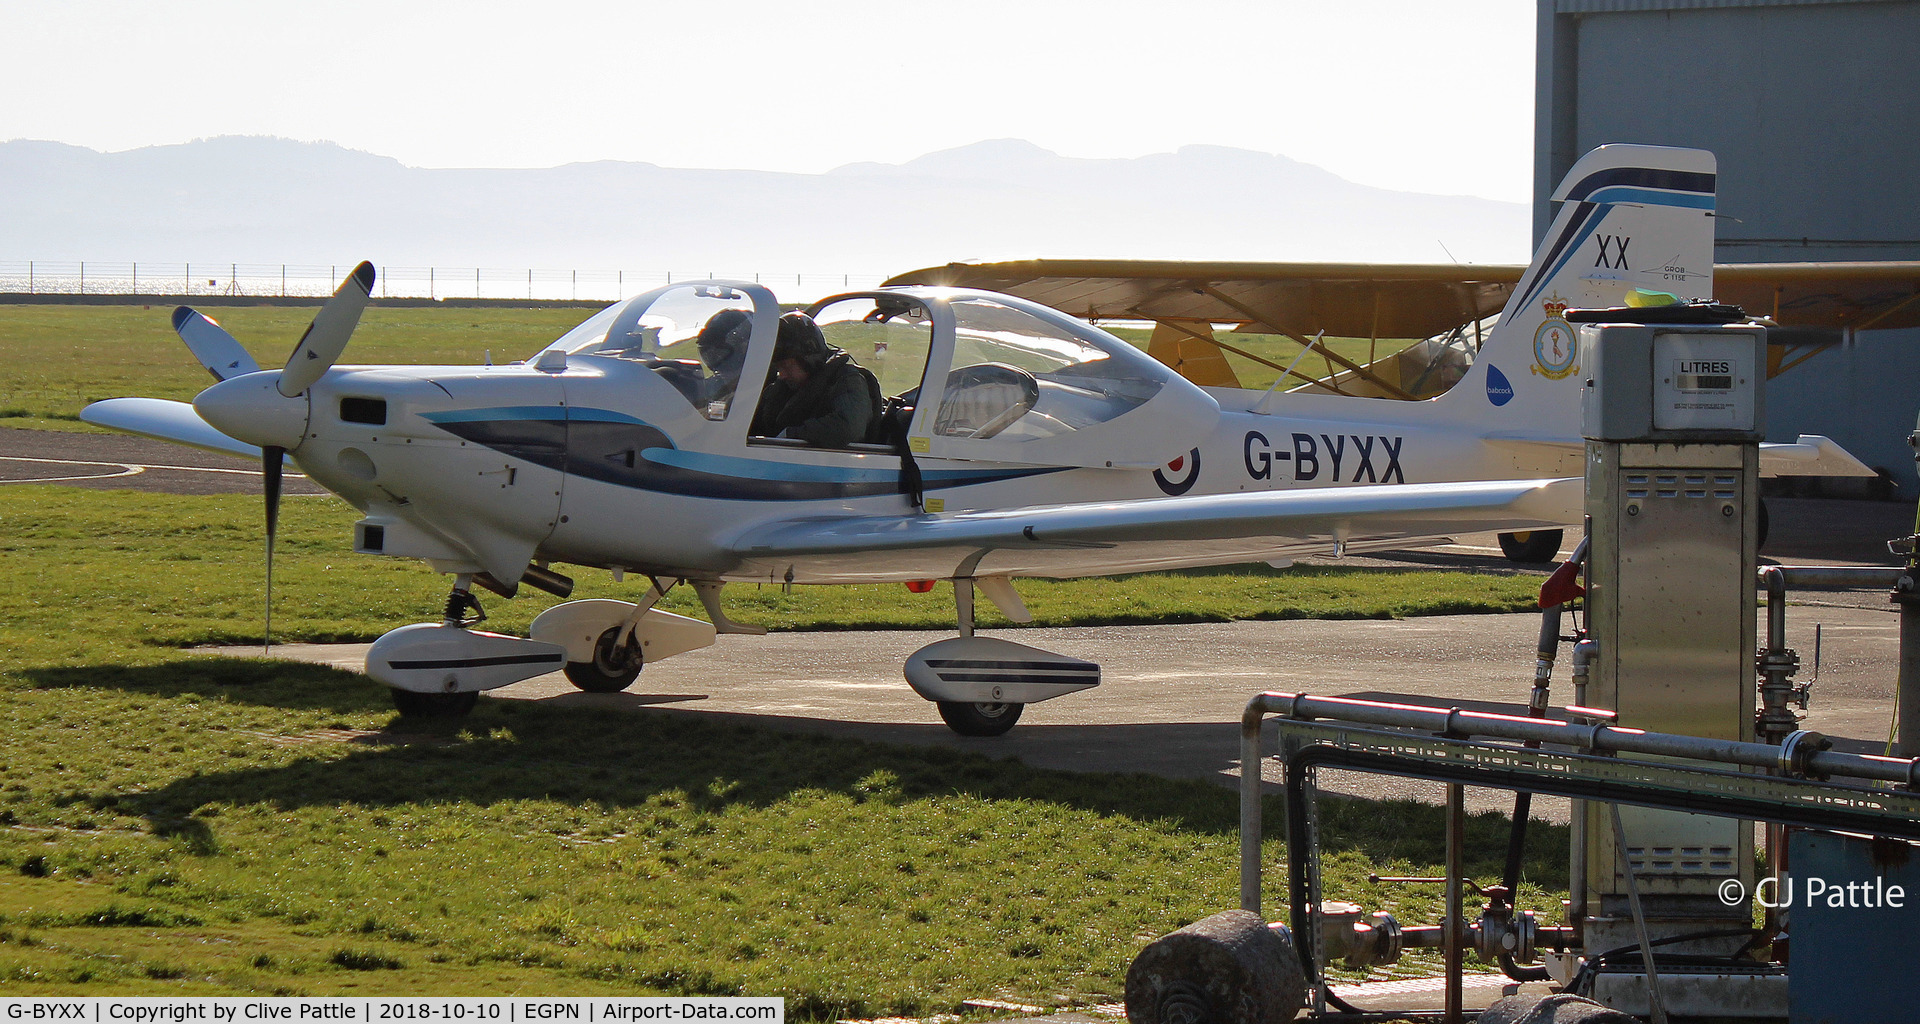 G-BYXX, 2001 Grob G-115E Tutor T1 C/N 82180/E, Refuelling stop at Dundee